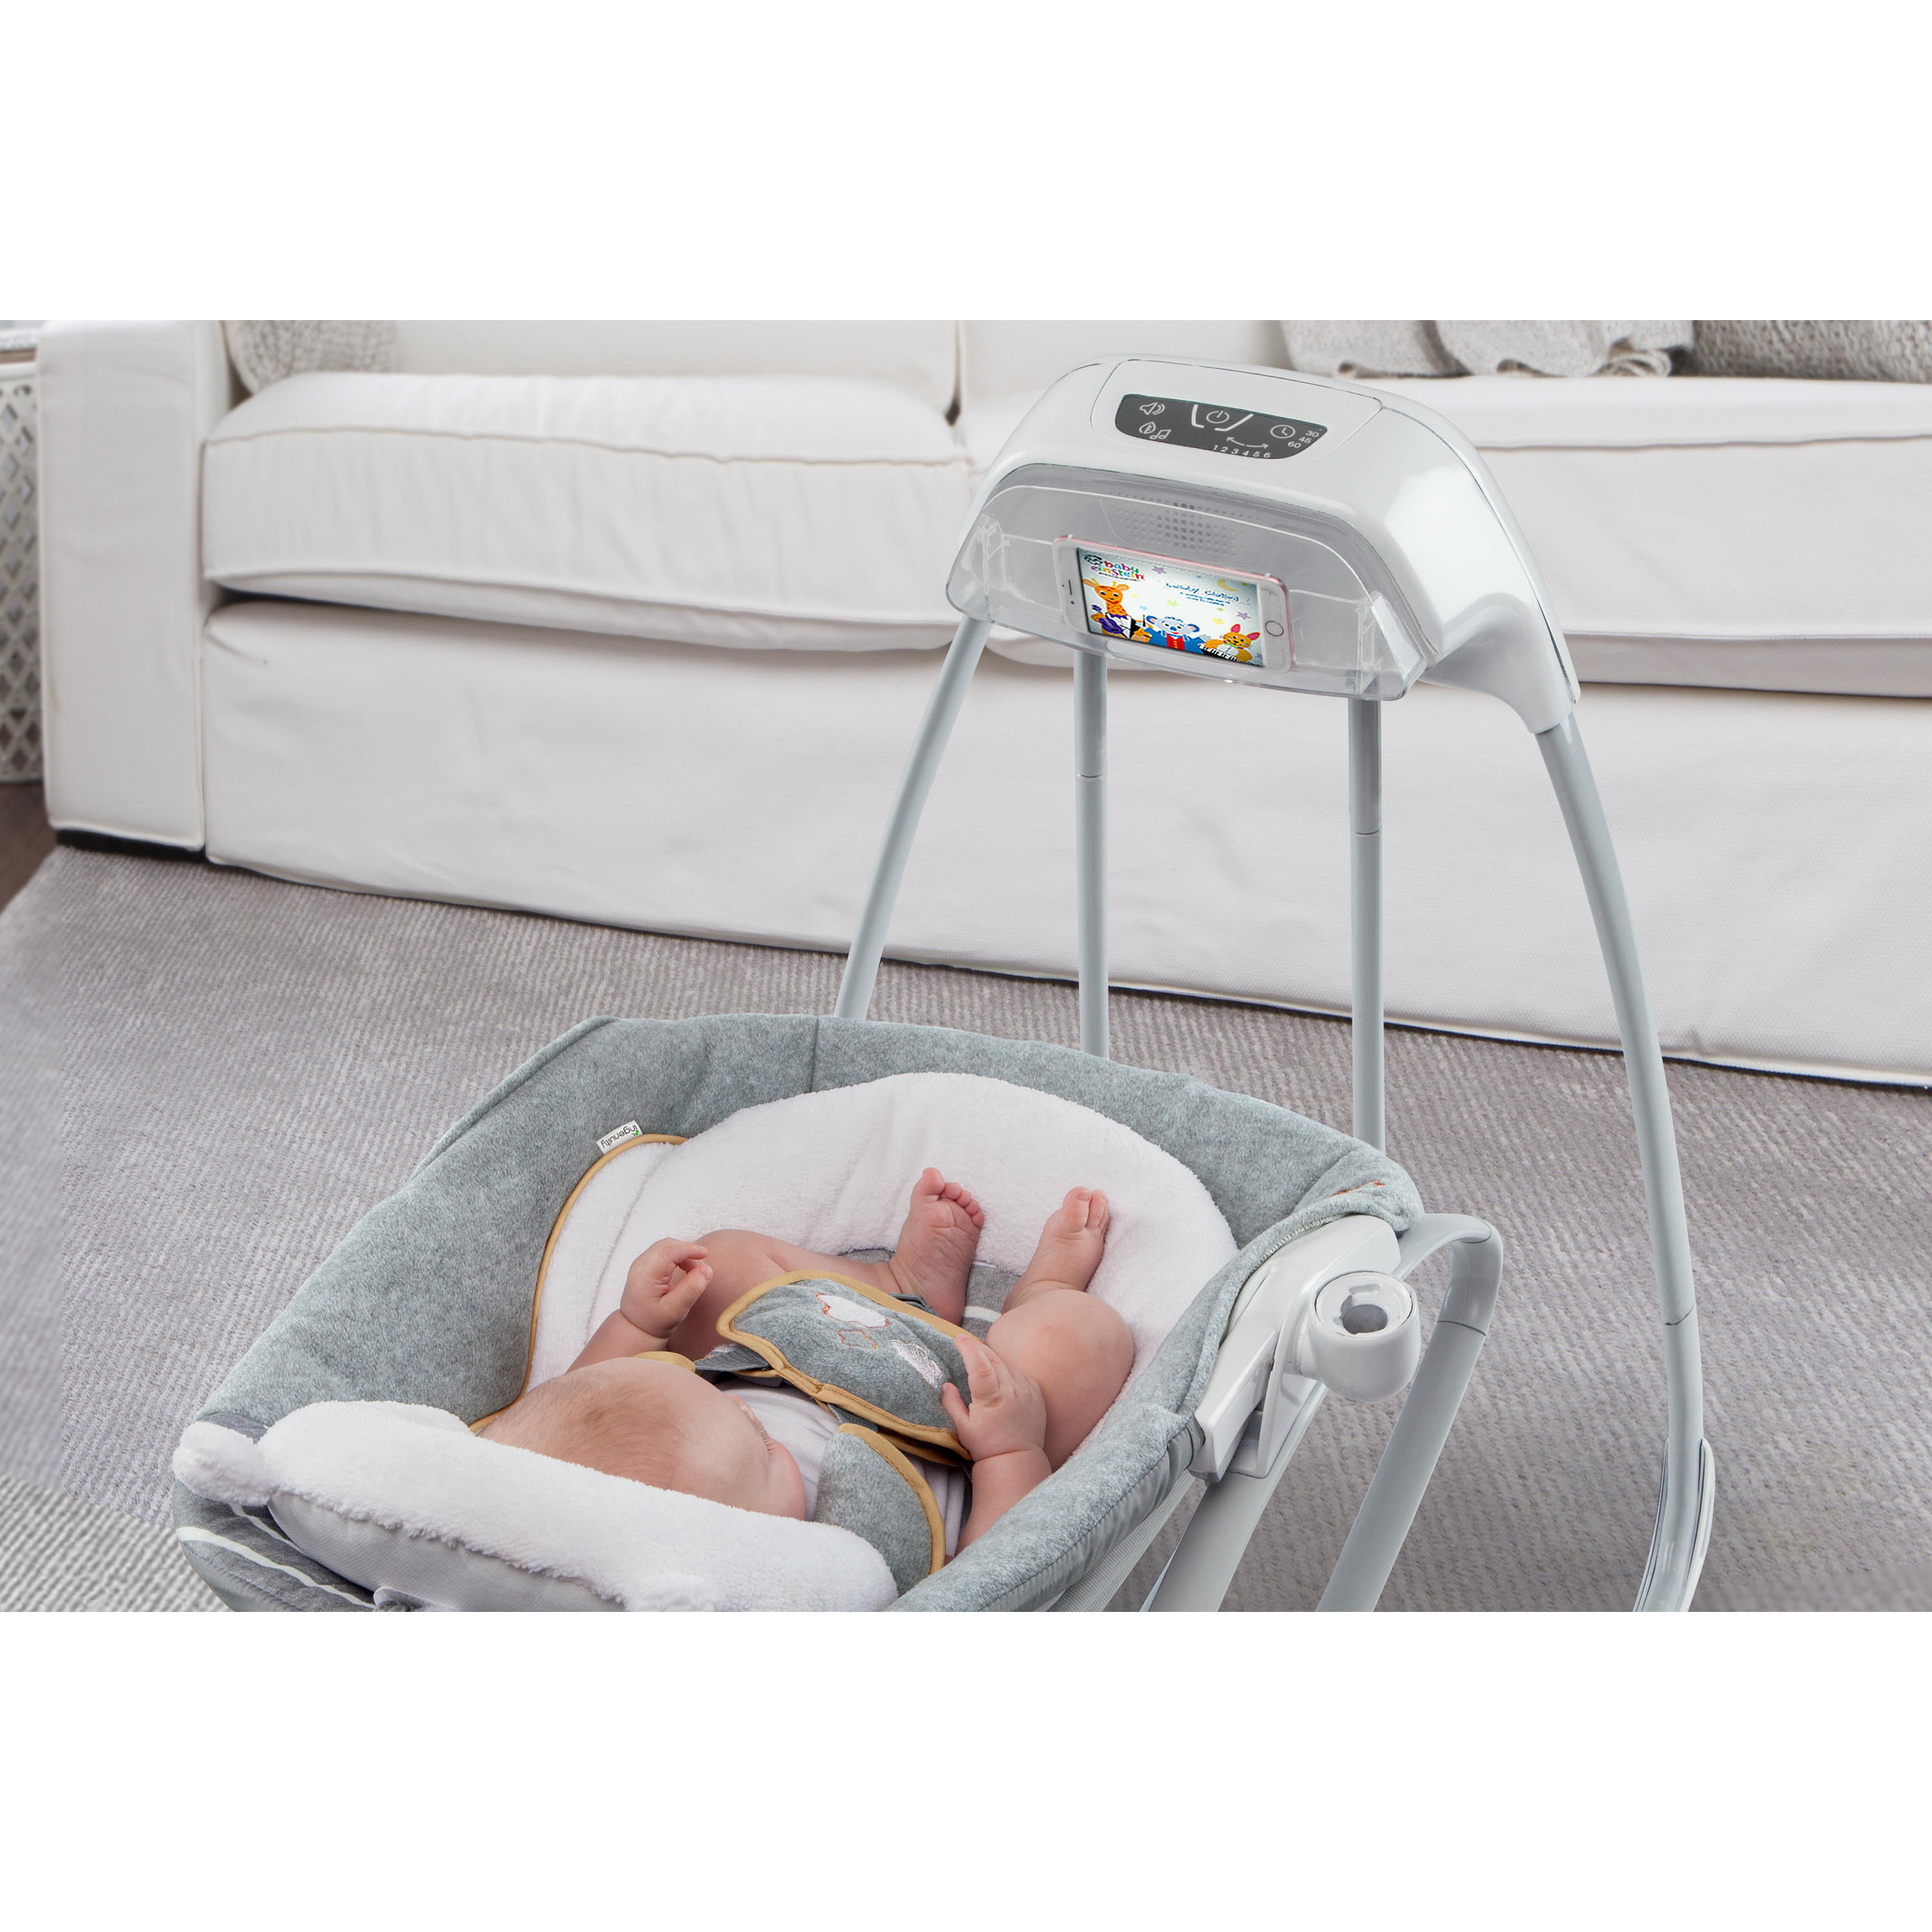 ingenuity boutique collection smartsize gliding swing & rocker